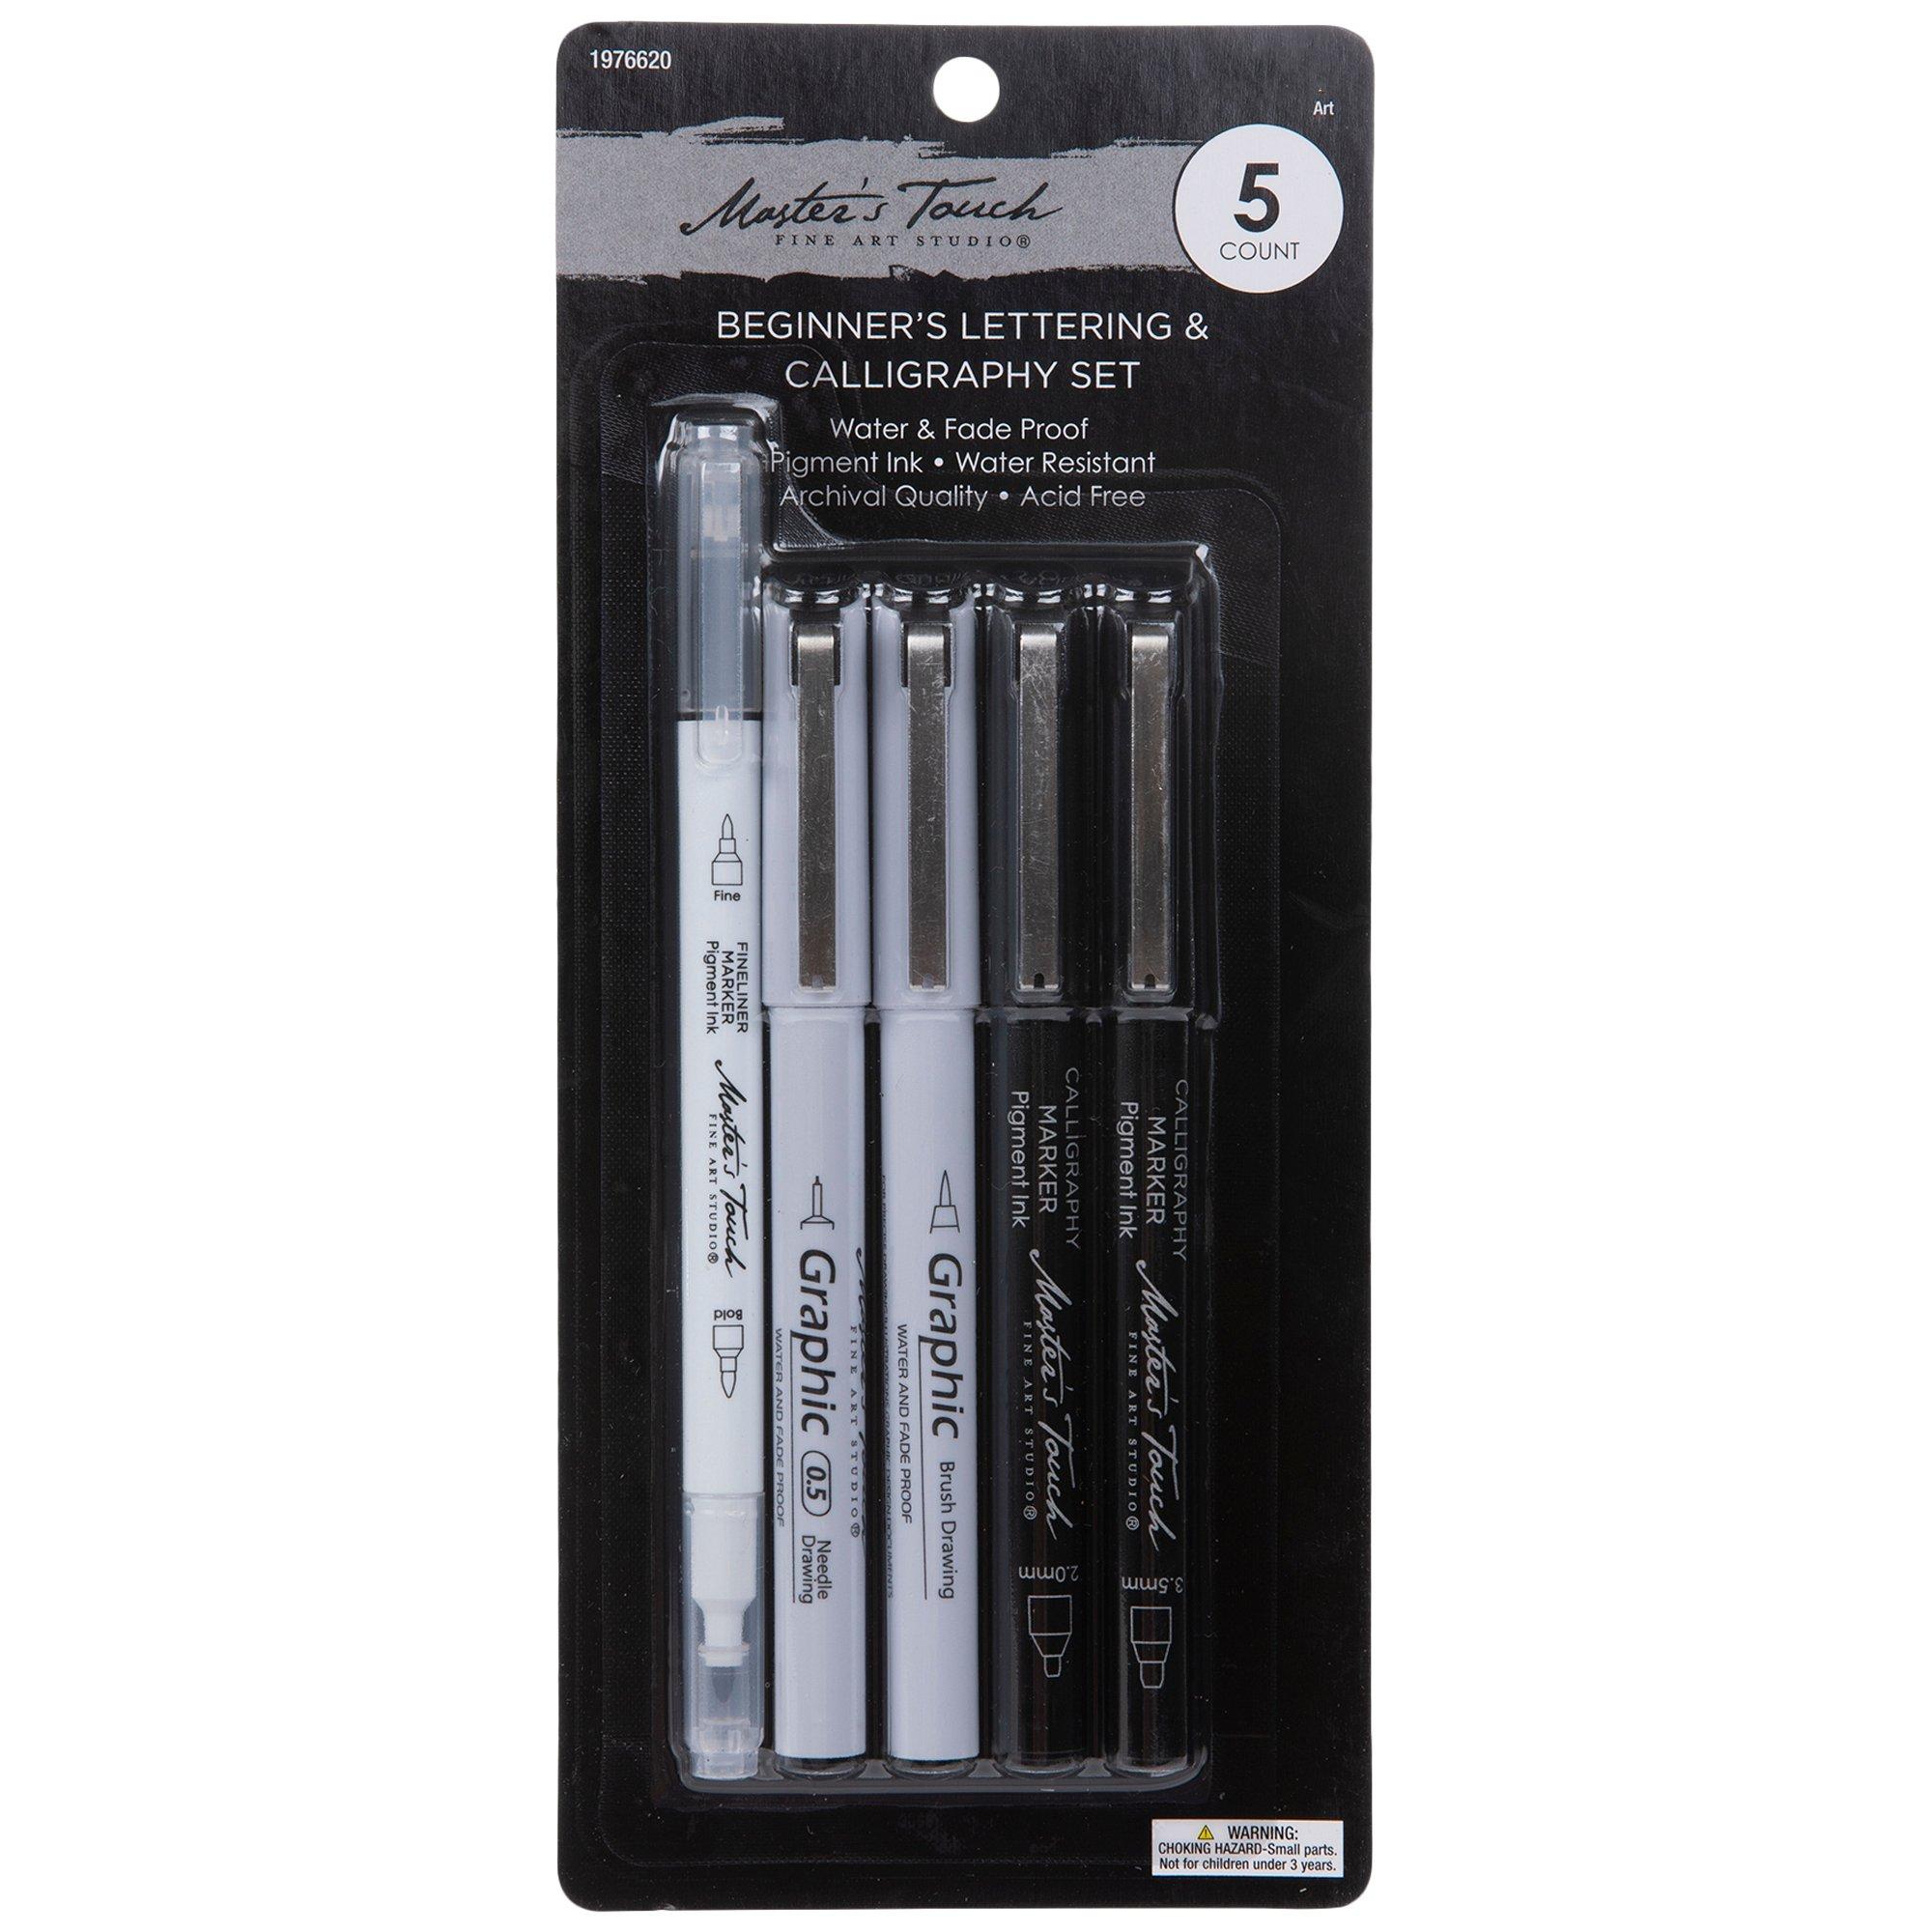 Crafter's Closet Artist Illustration Micro-Line Black Pen Set, includes  Small, Fine and Detail Pen Tips, 3 Pieces